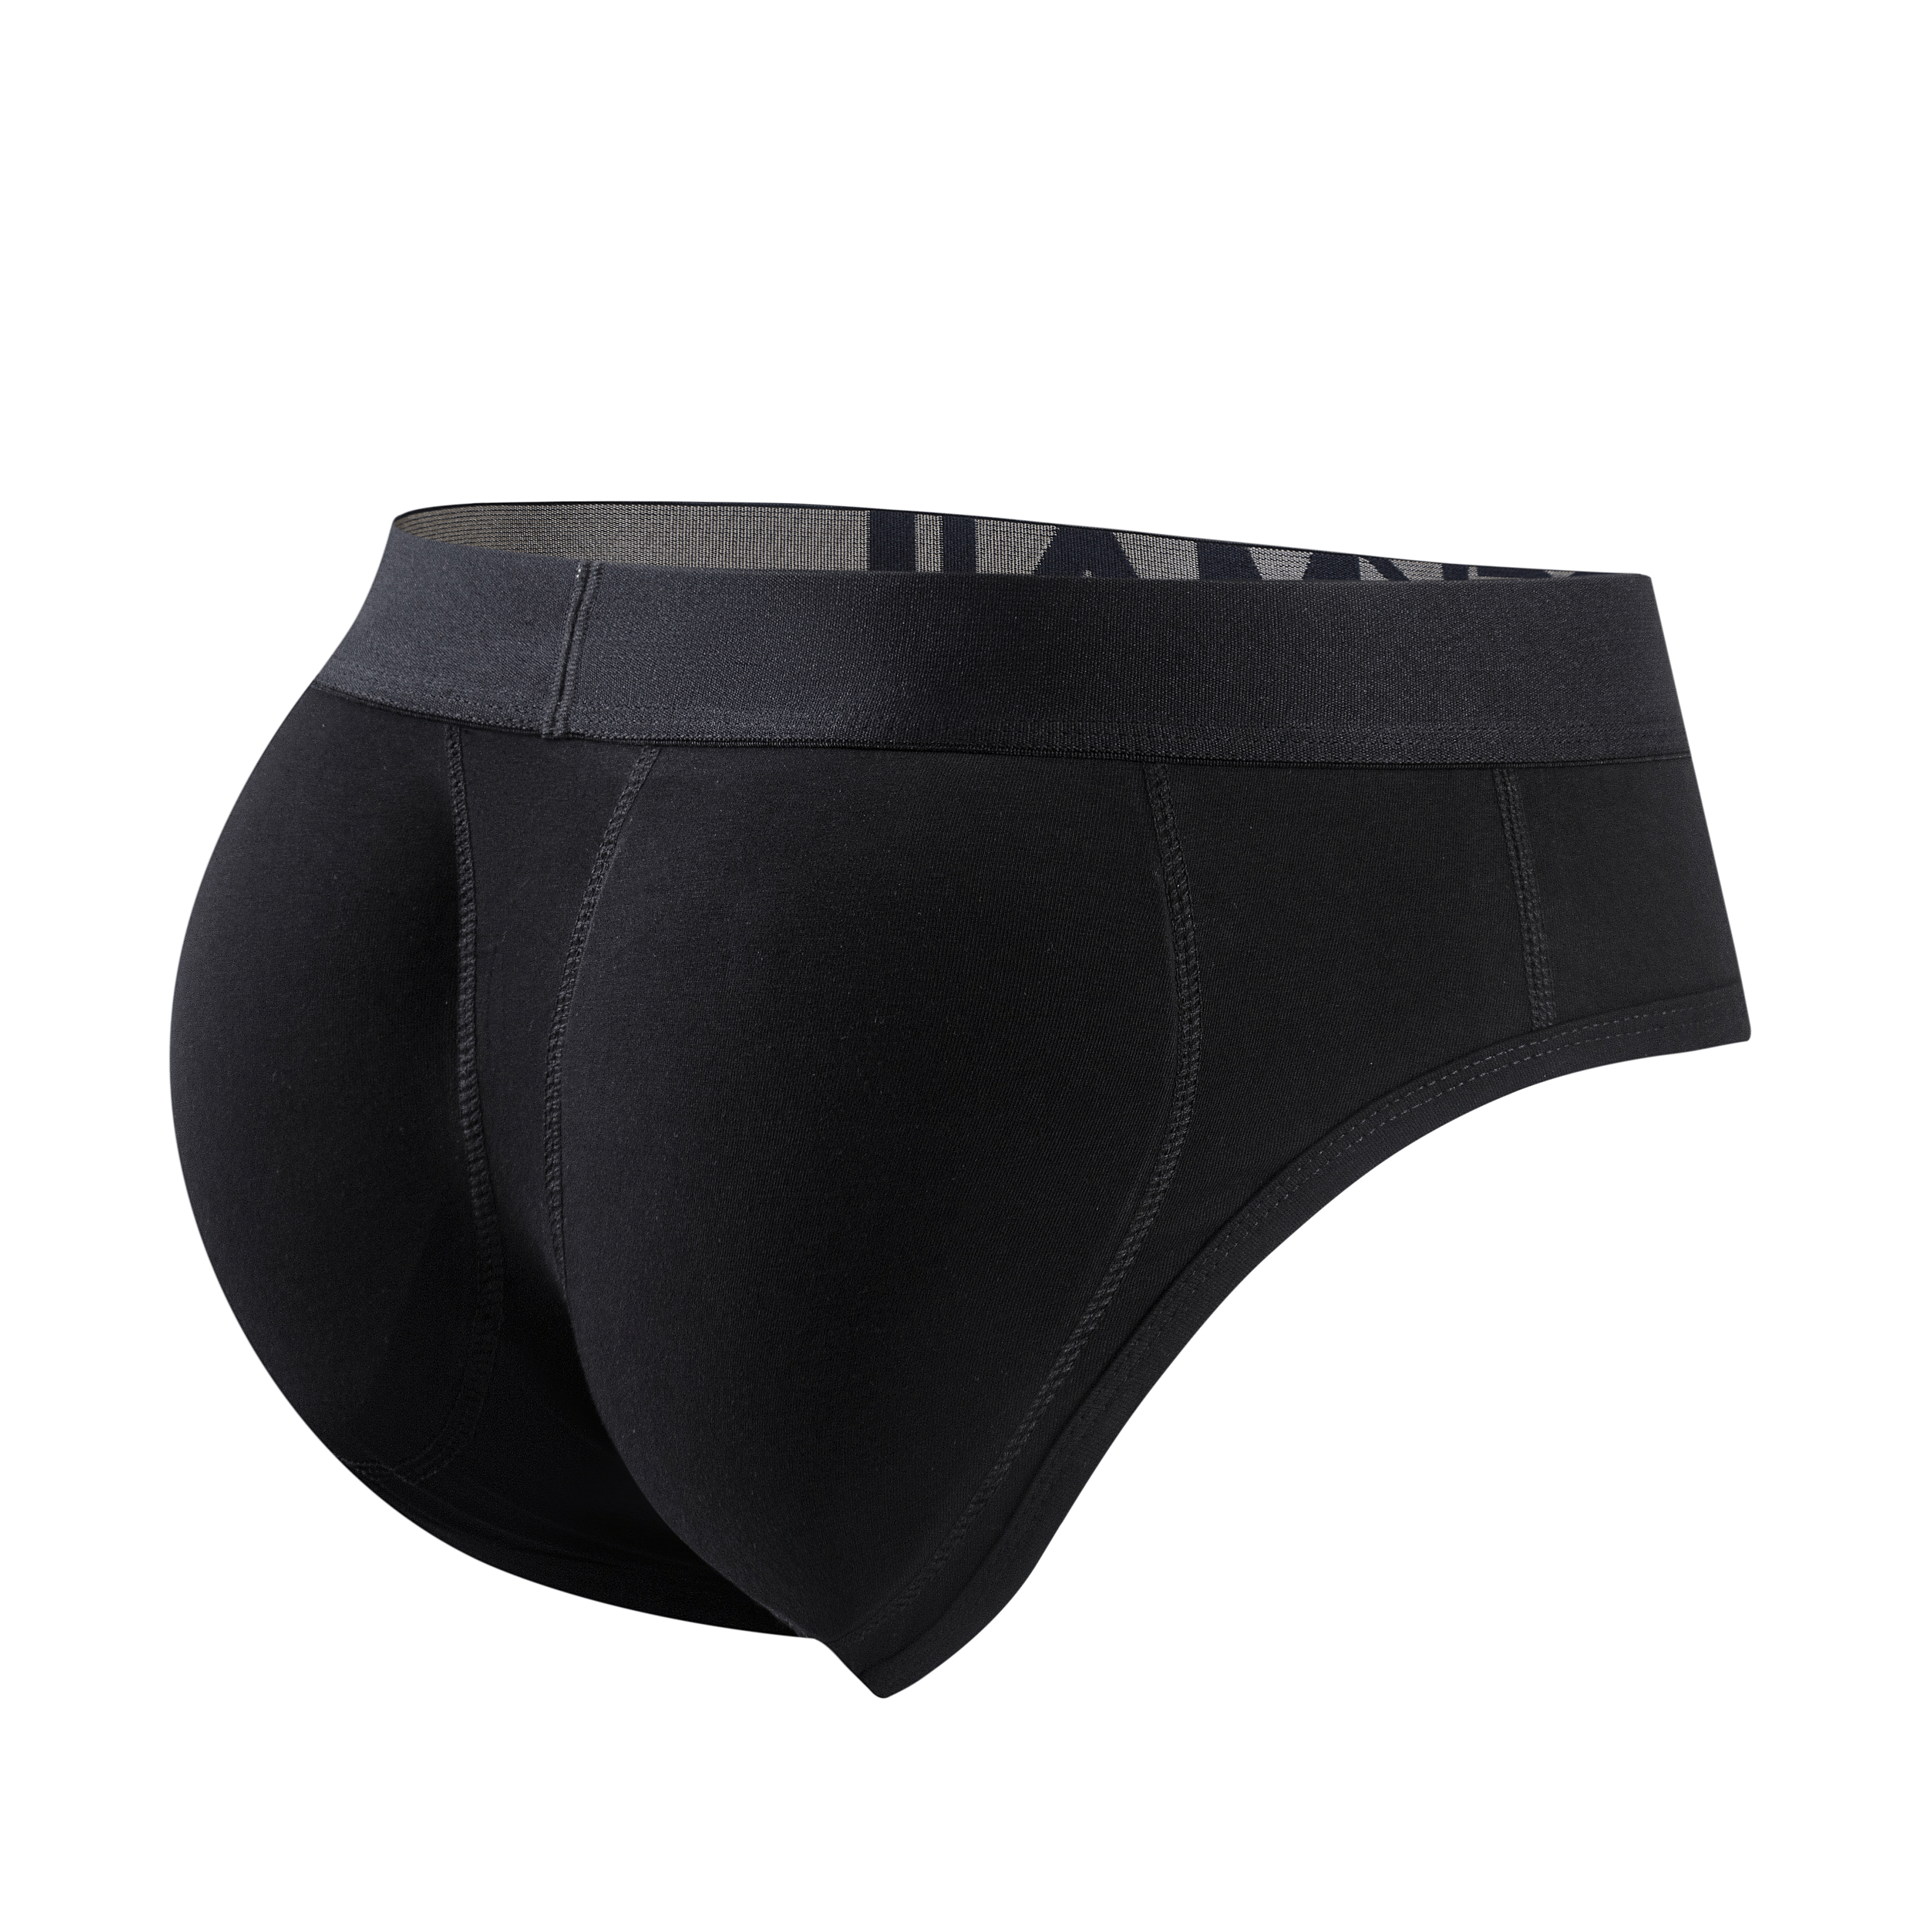 Jockmail Mens Butt Enhancing Scrotal Support Underwear With Removable Padded  Trunk And Enlarged Pouch Black From Spider_hoodie, $10.11